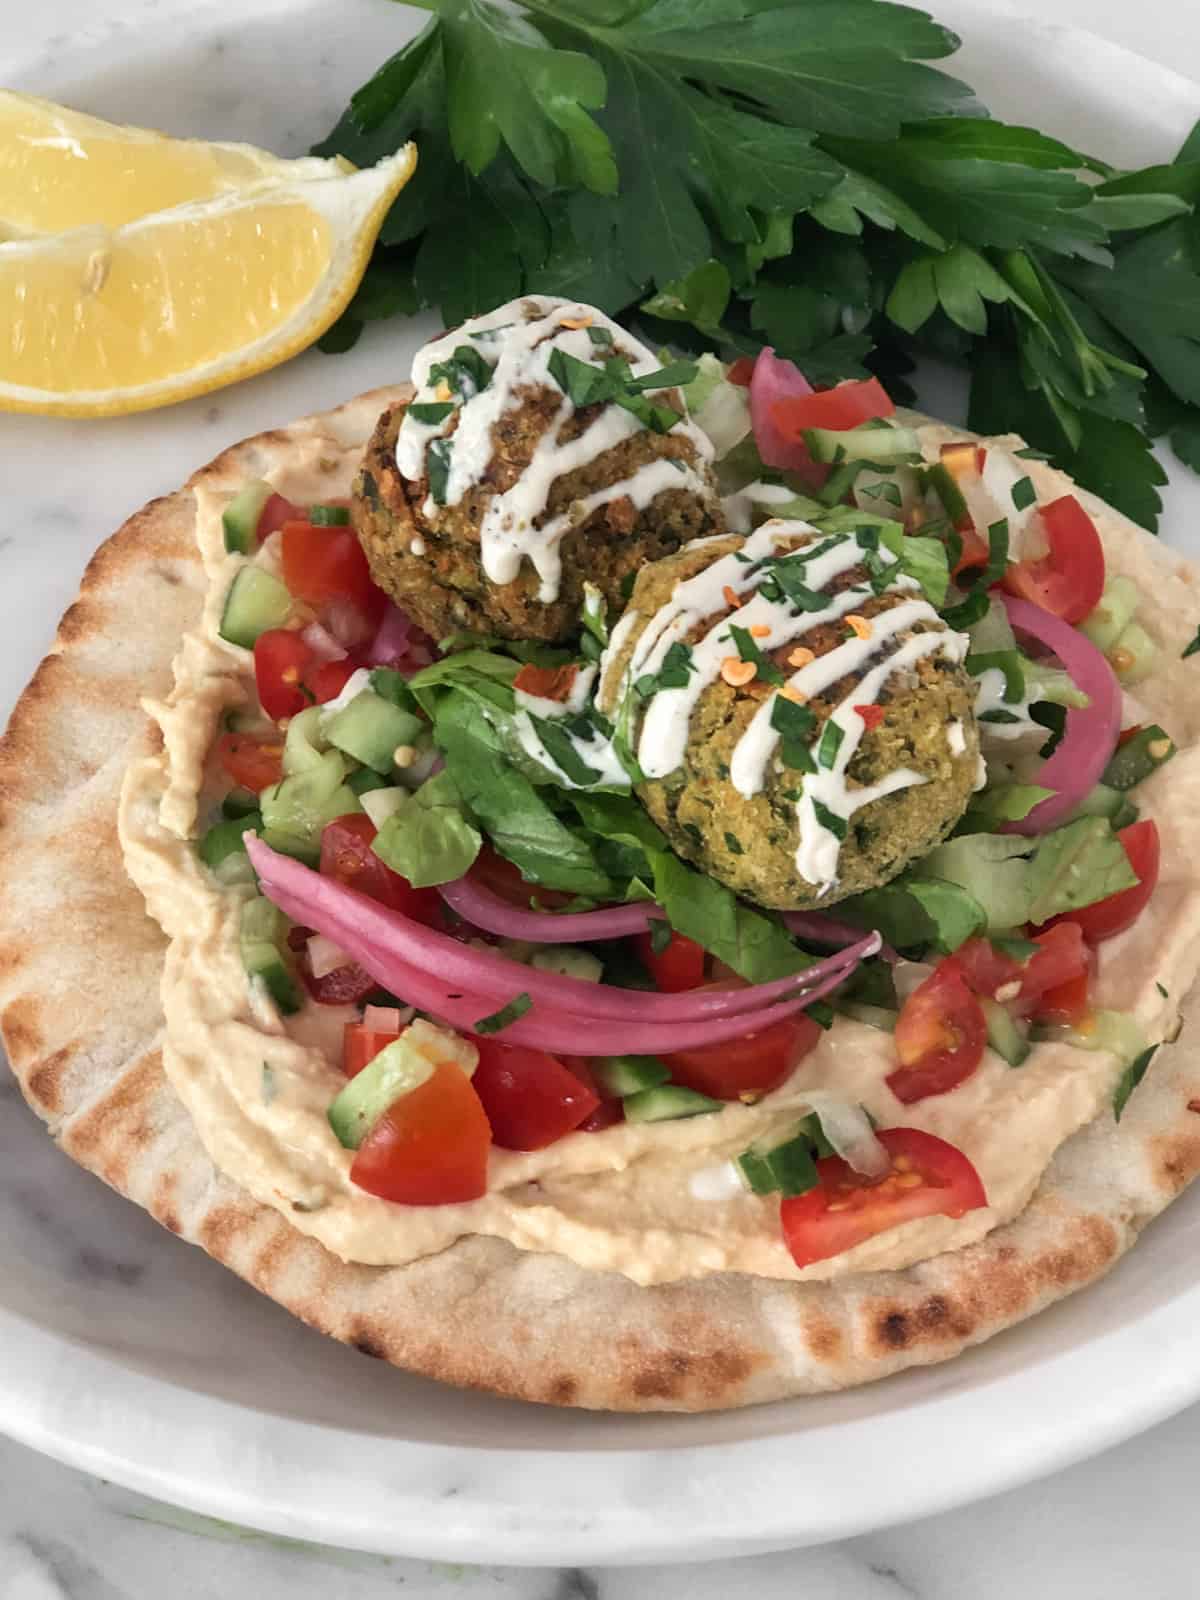 Pita topped with hummus, tomato, cucumber, pickled onions, falafel and tahini sauce.